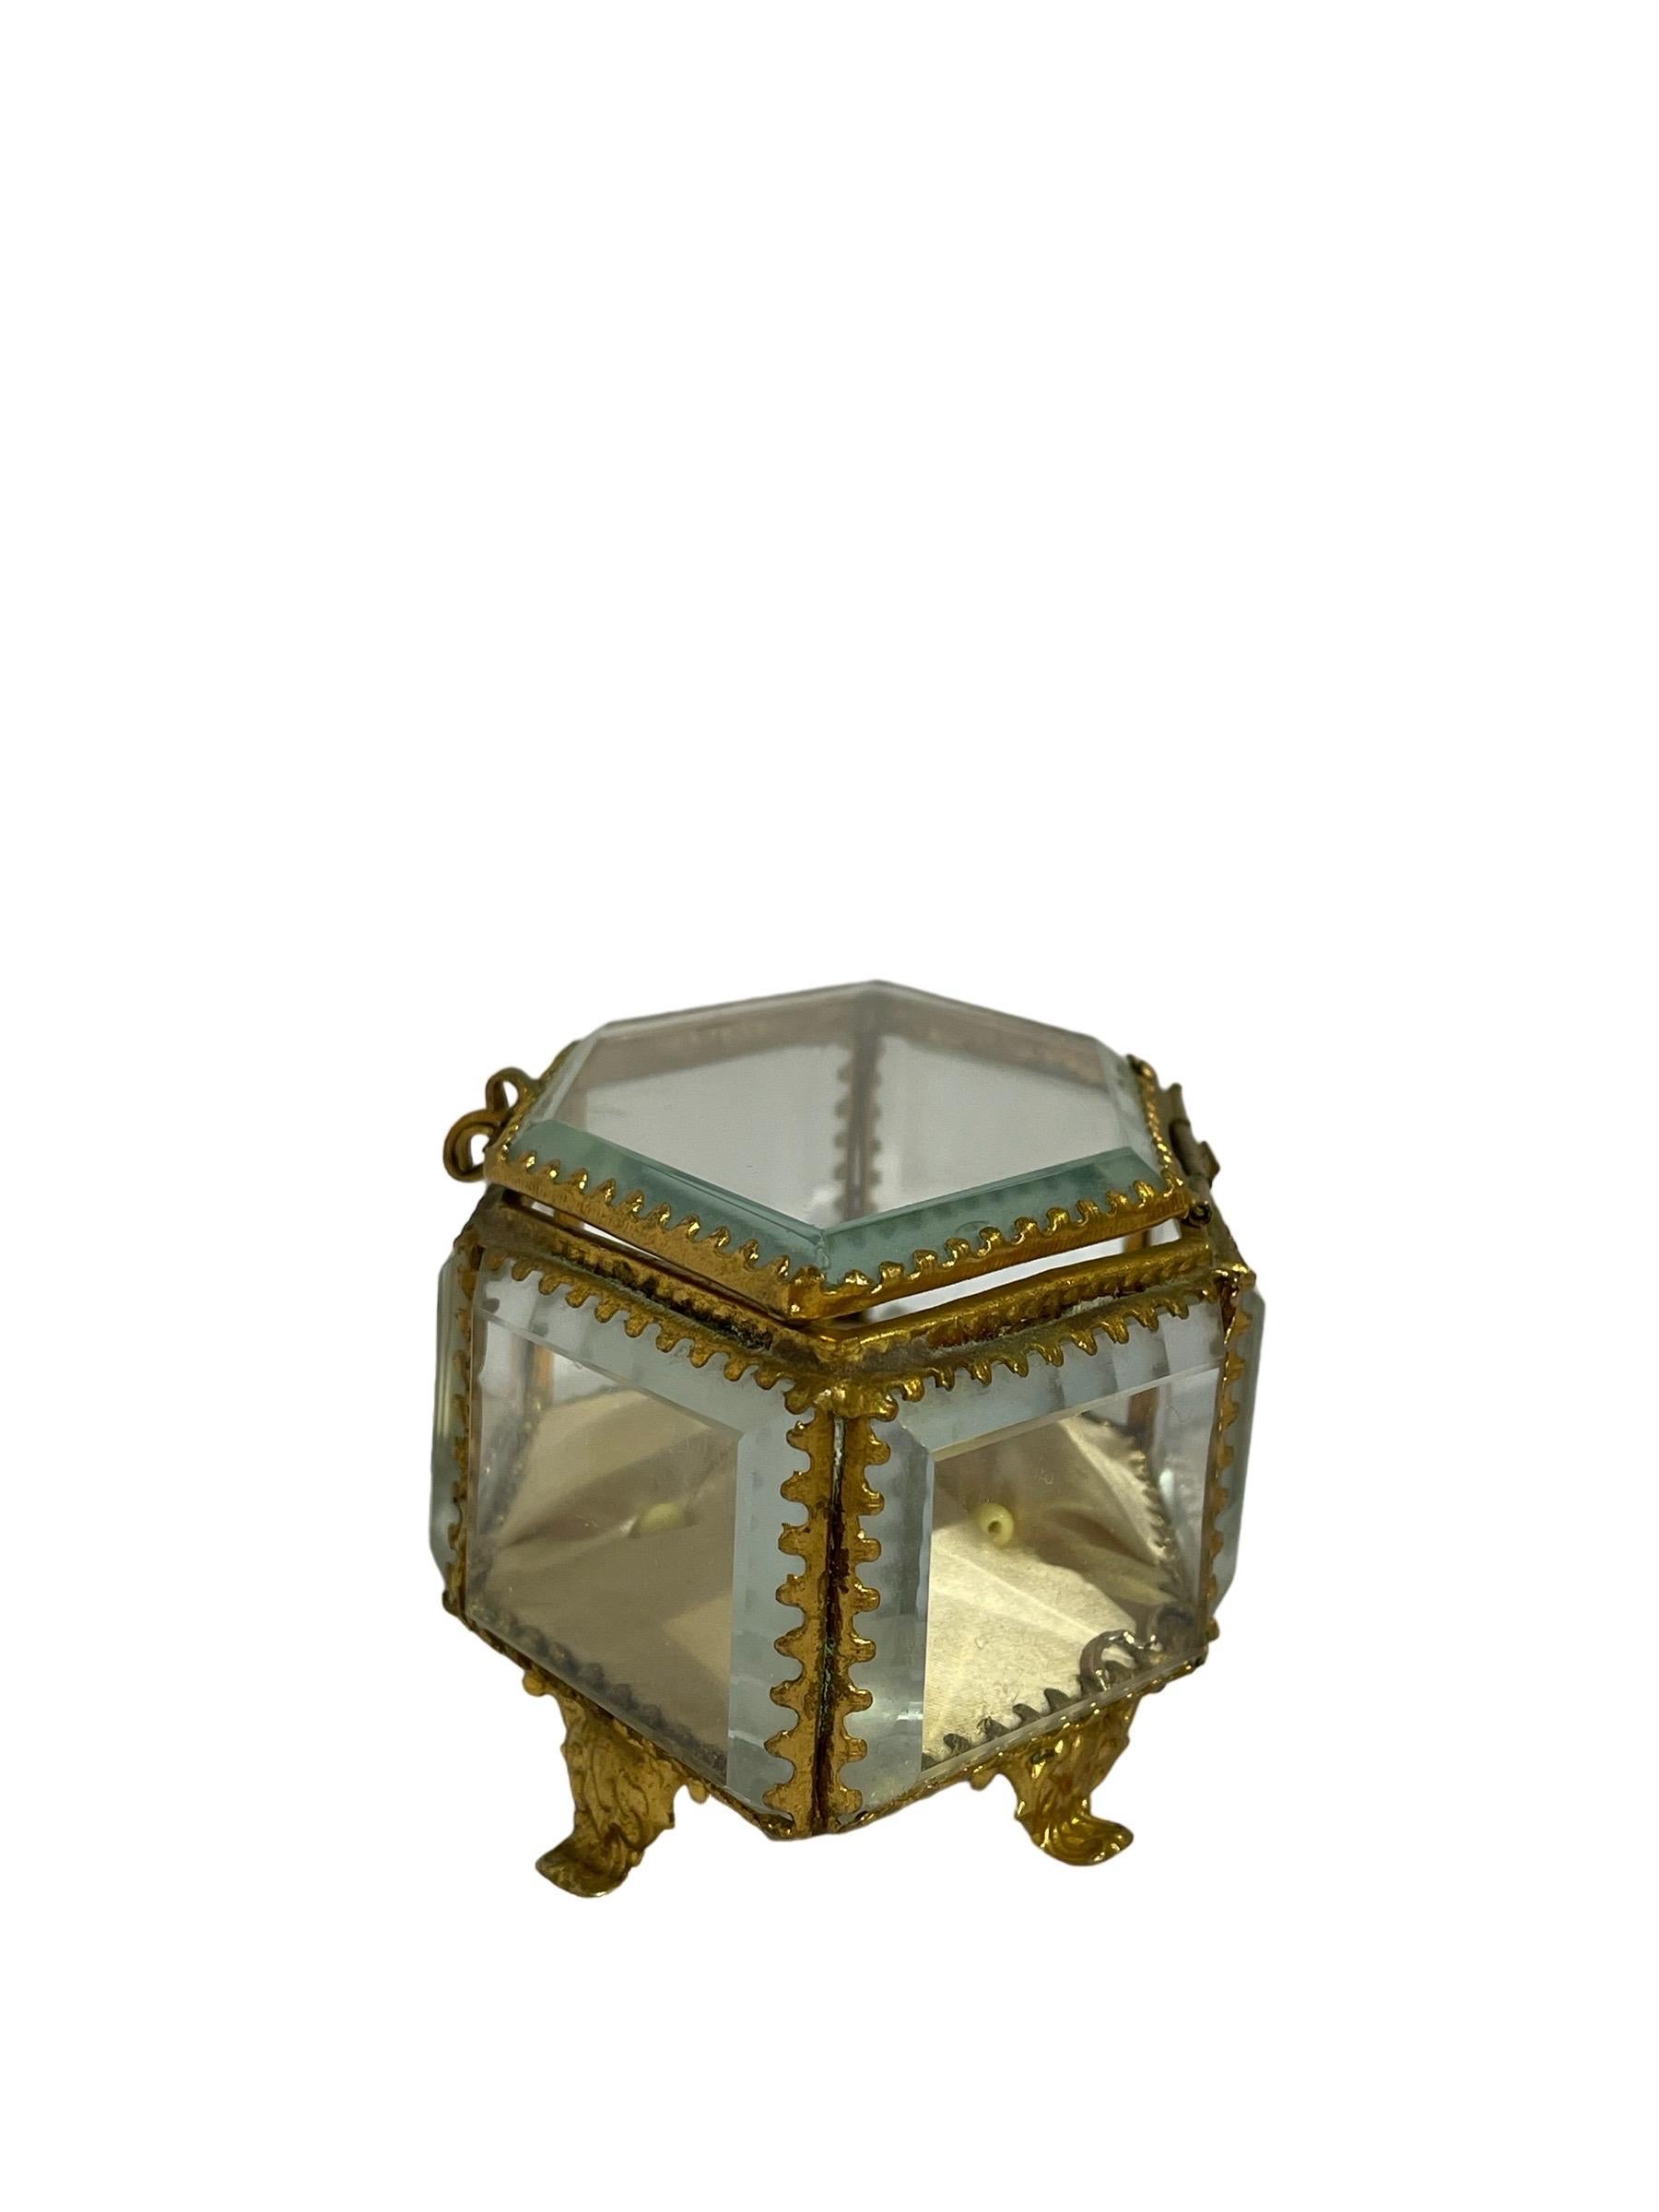 Antique French Victorian Yellow Tufted Jewelry Box 

Amazing rare hexagon shaped French Victorian small antique beveled glass and gilt metal jewelry casket. 

Small gap when closed and small chip on upper left corner. Very old piece with slight